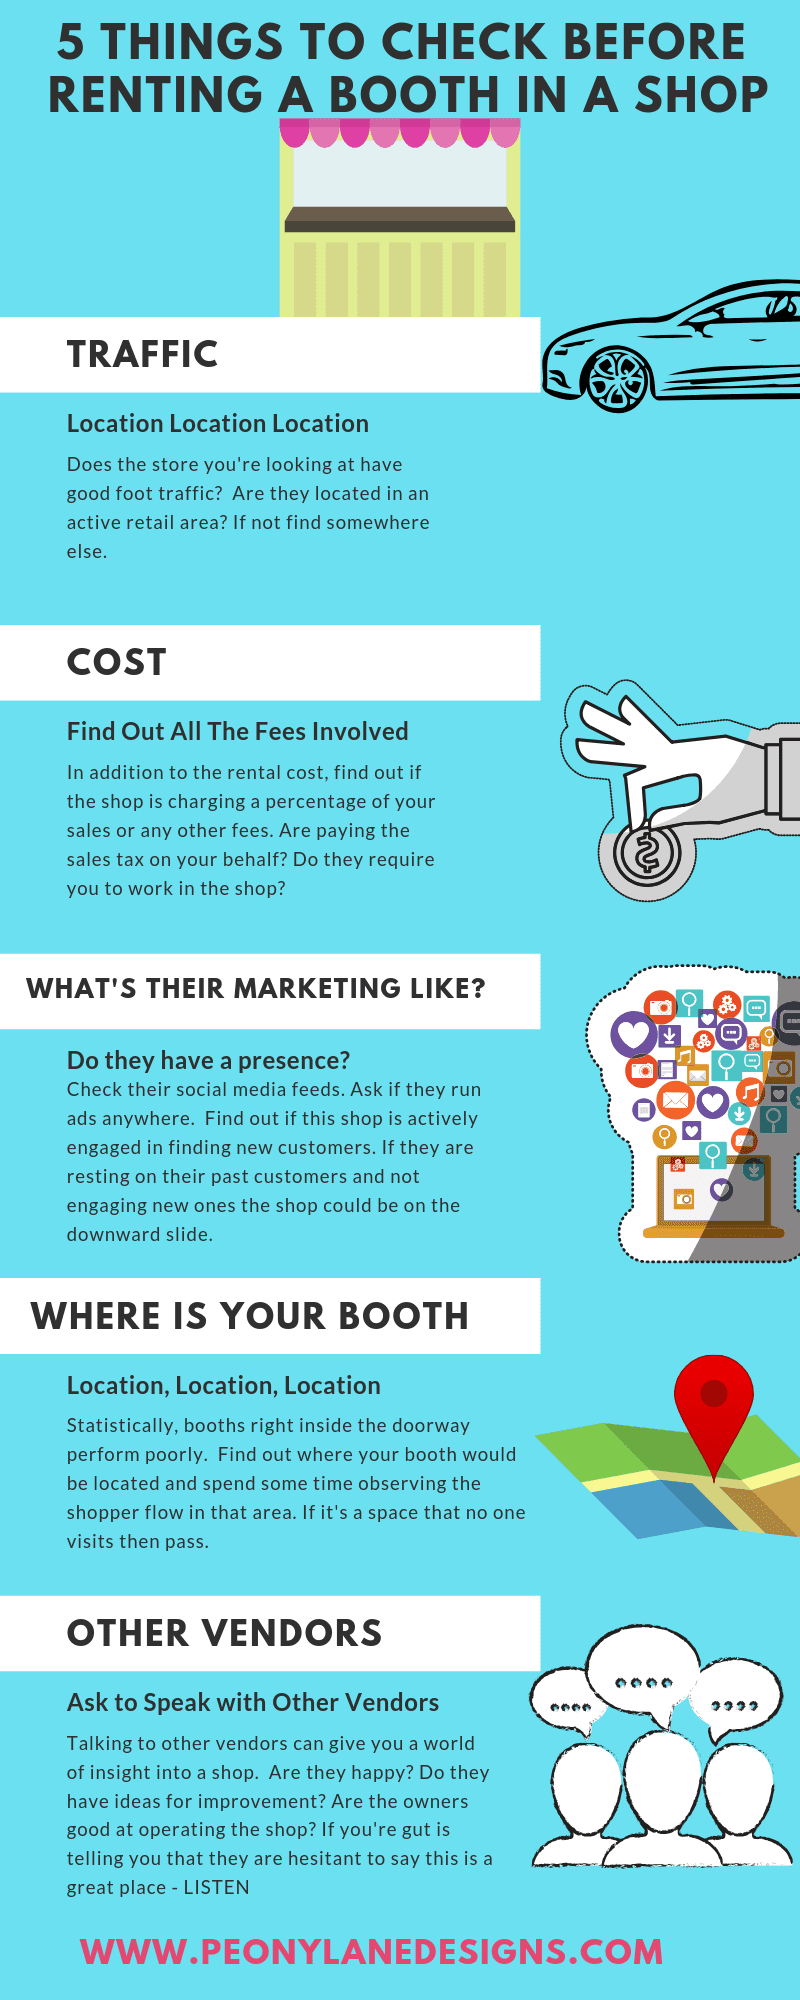 Renting a Booth // retail sales tips // boutique market // sales tips retail //retail business //retail life // retail tips // retail store // retail shop